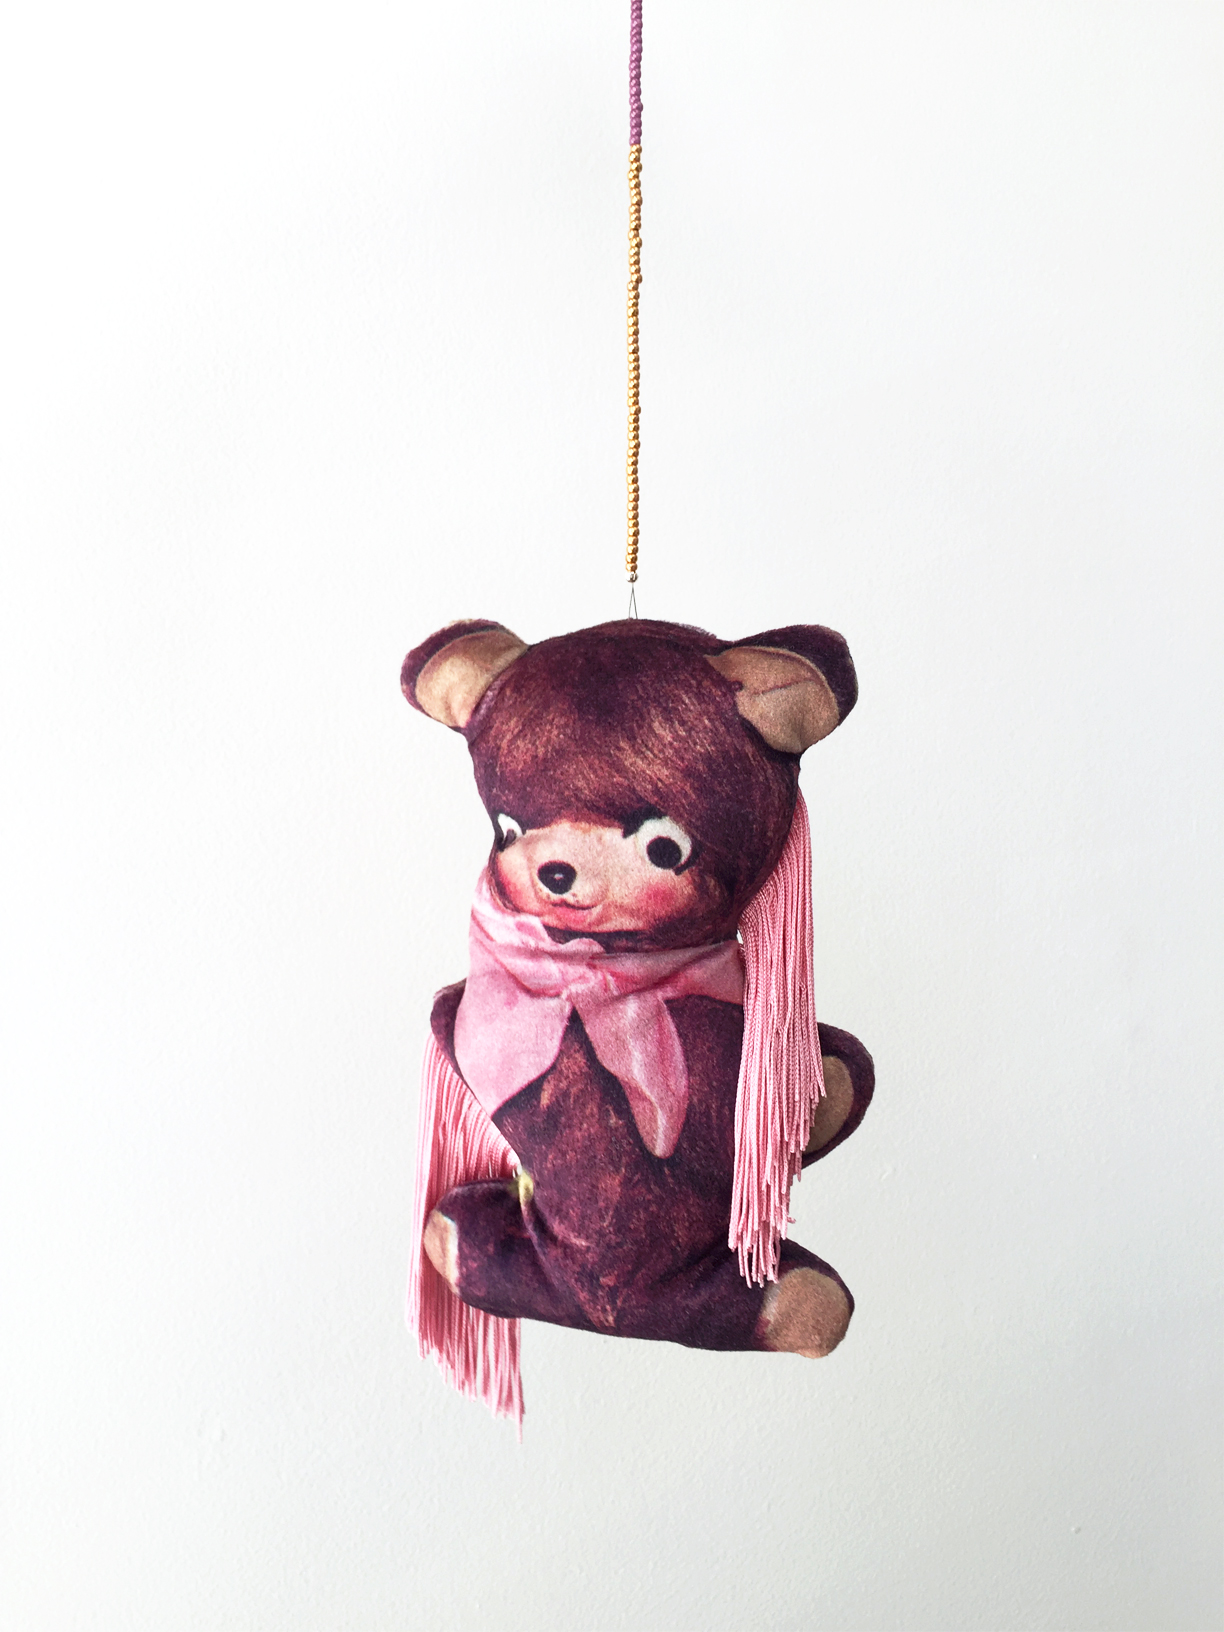 (How to) Make a Bear, 2019, digitally printed velvet, found image, polyester, wool, glass beads